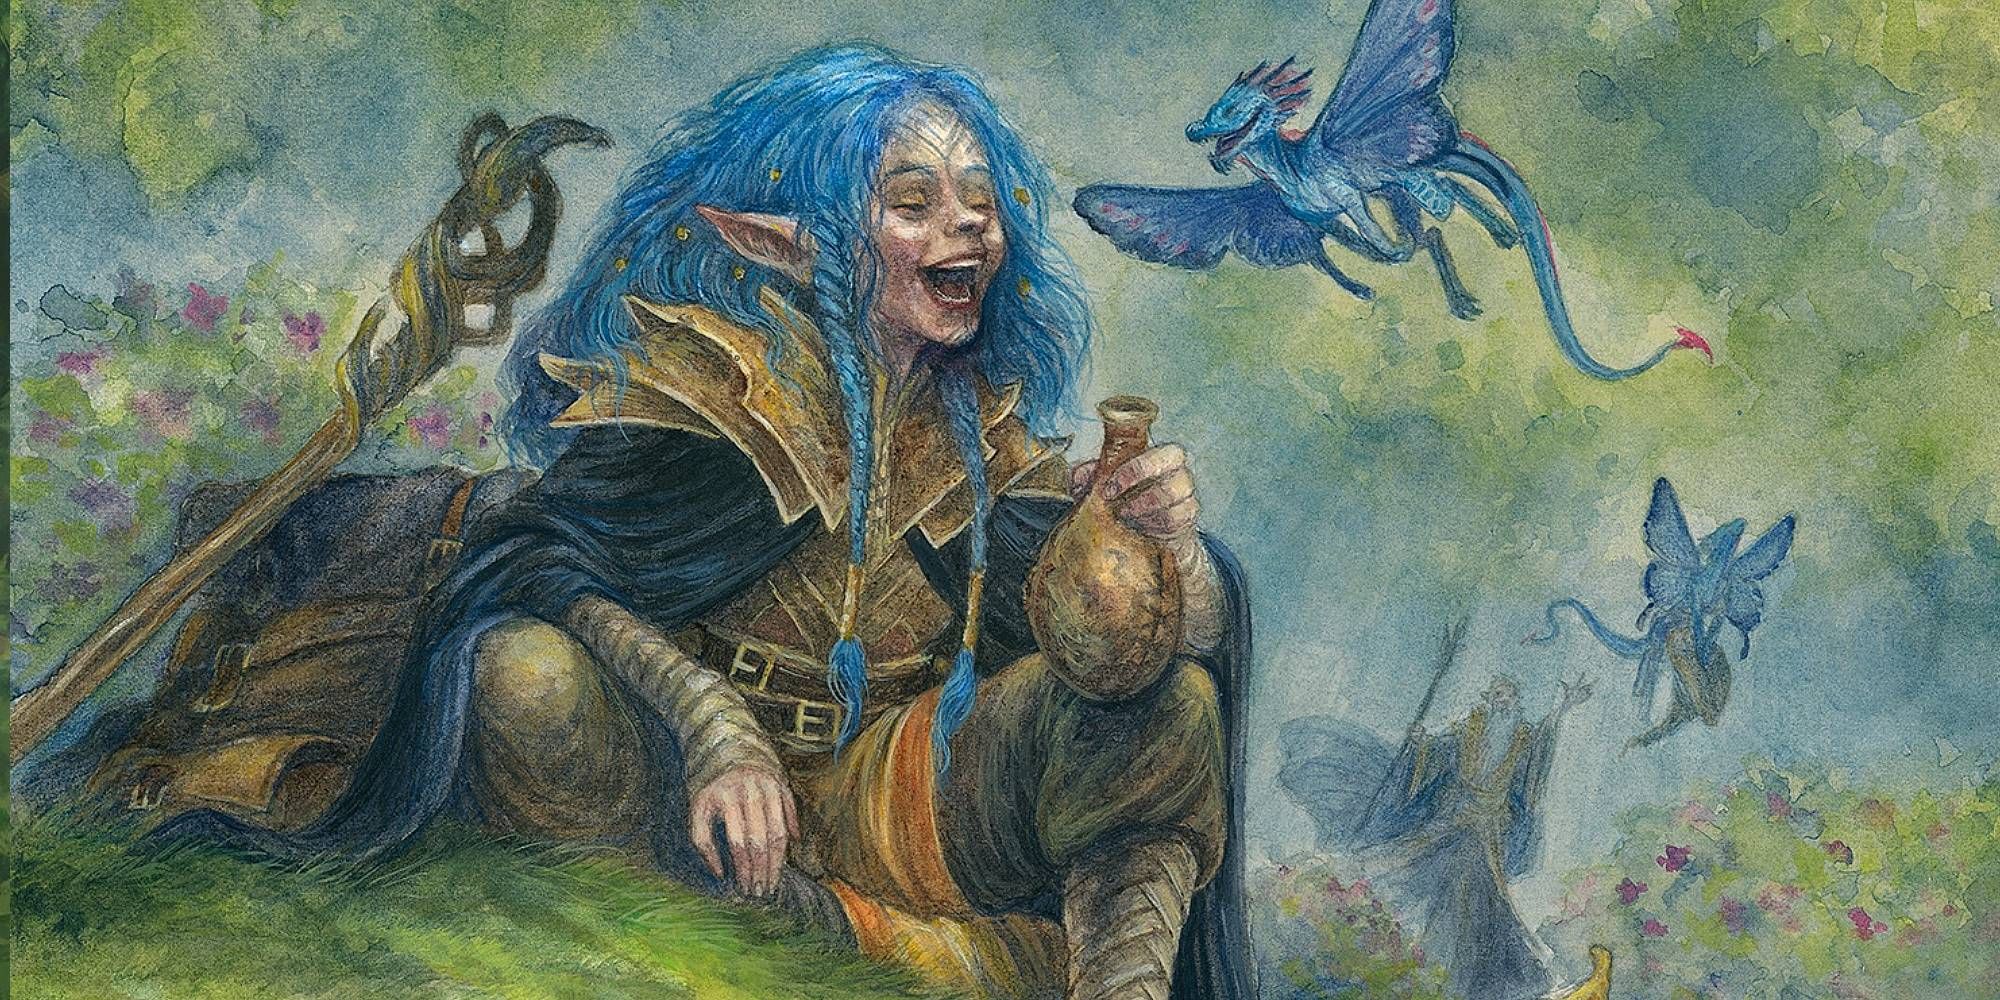 A blue haired gnome figure laughs as she leans on a green hill with blue dragon fairies flying around her